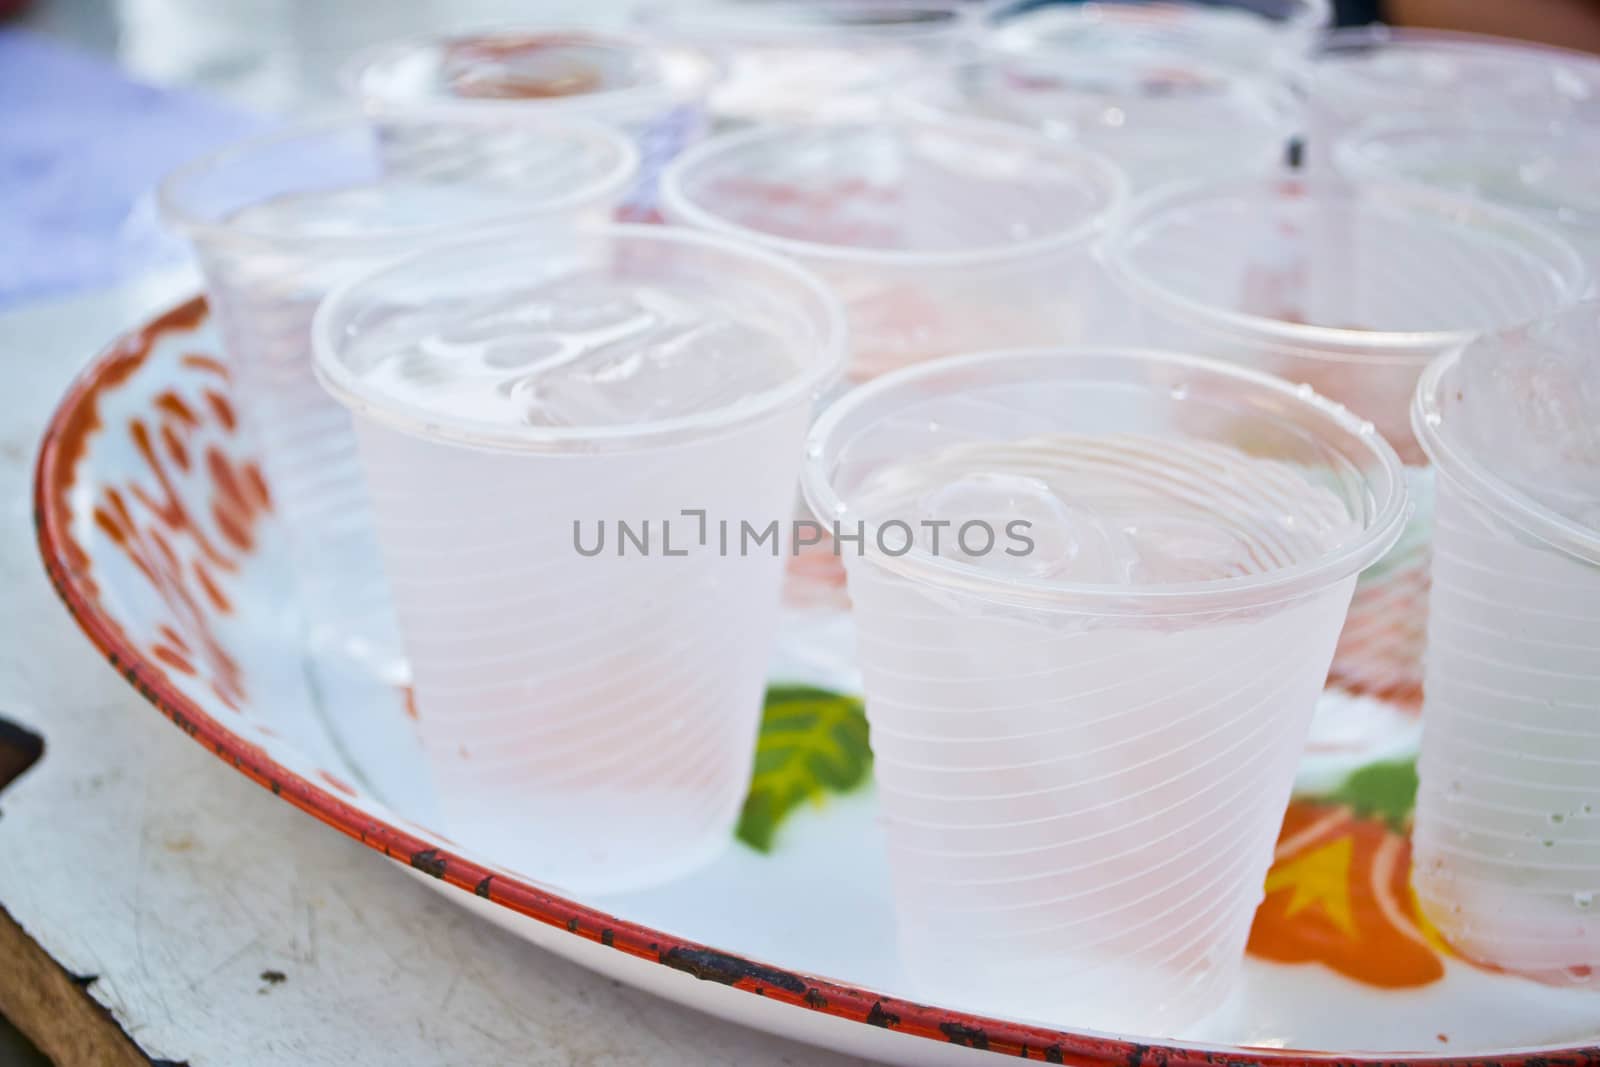 Soft drinks in plastic cups